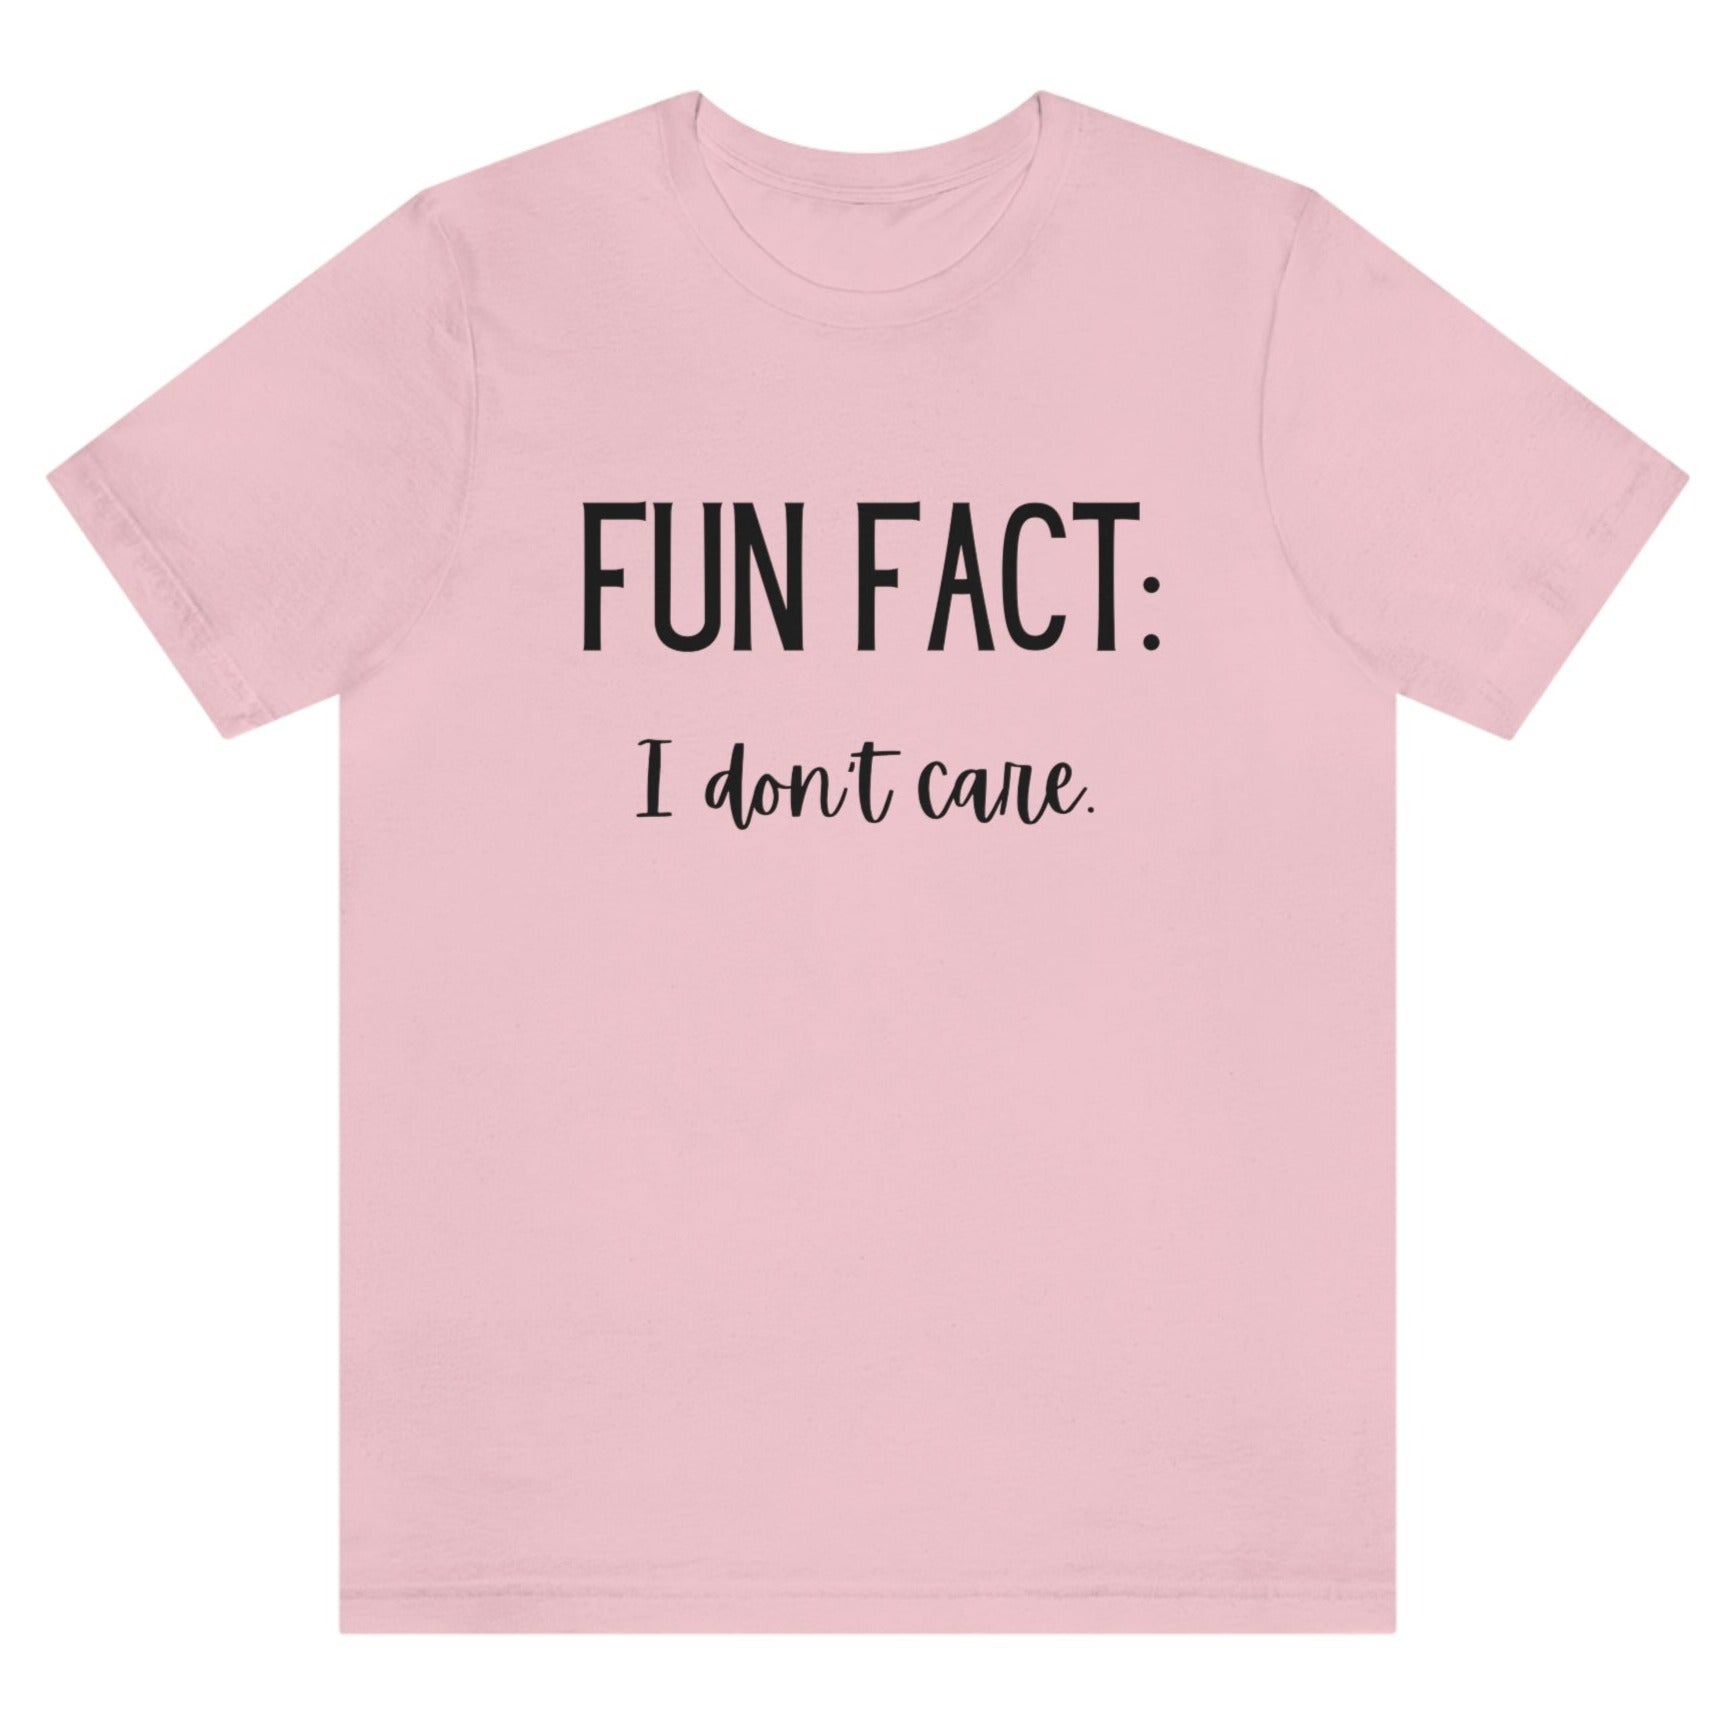 fun-fact-i-dont-care-funny-pink-t-shirt-womens-sarcastic